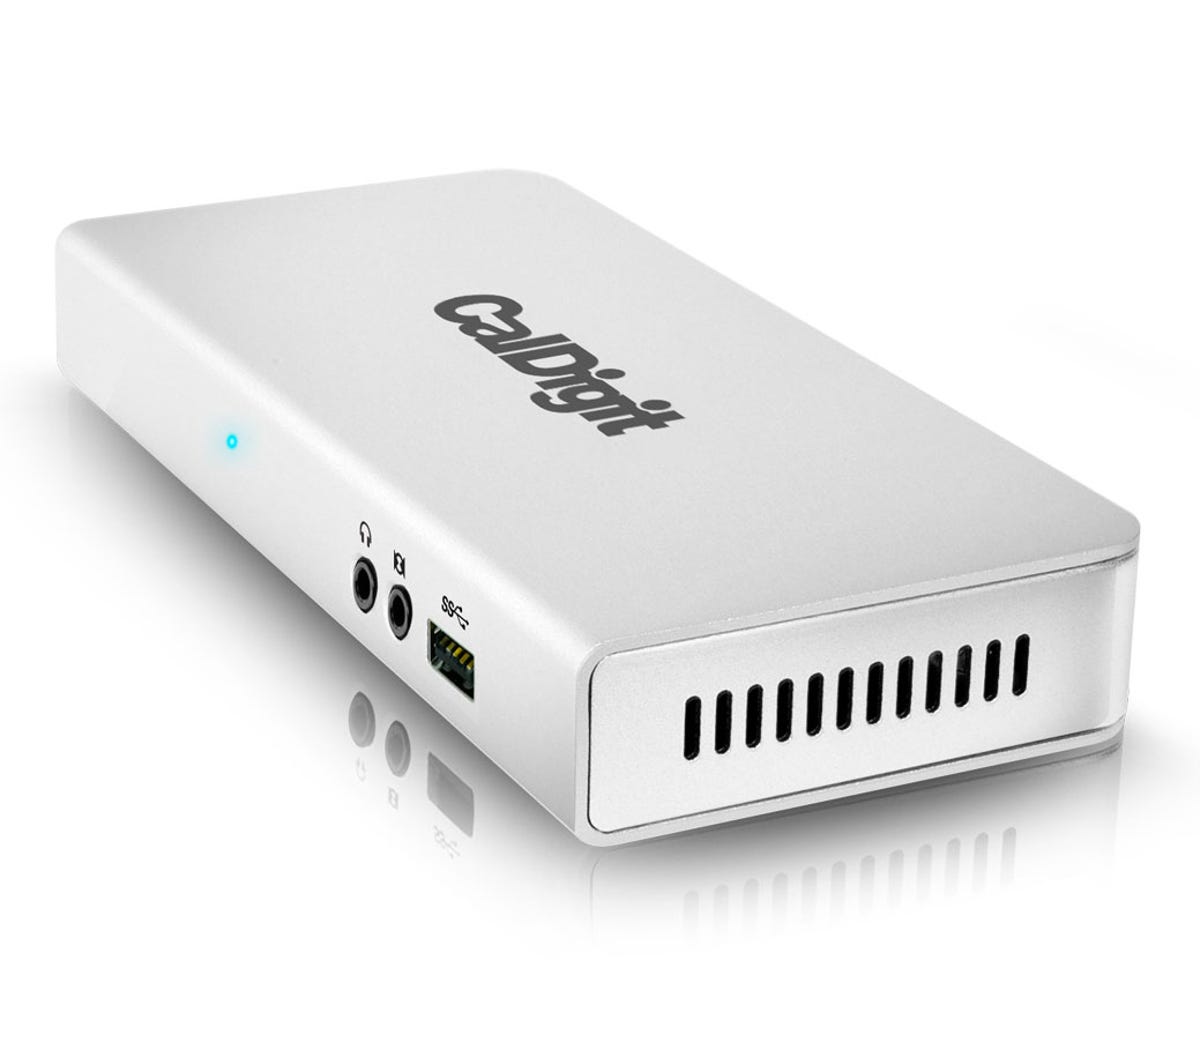 The front of CalDigit's $200 Thunderbolt Station includes audio in, audio out, and USB 3.0 ports.